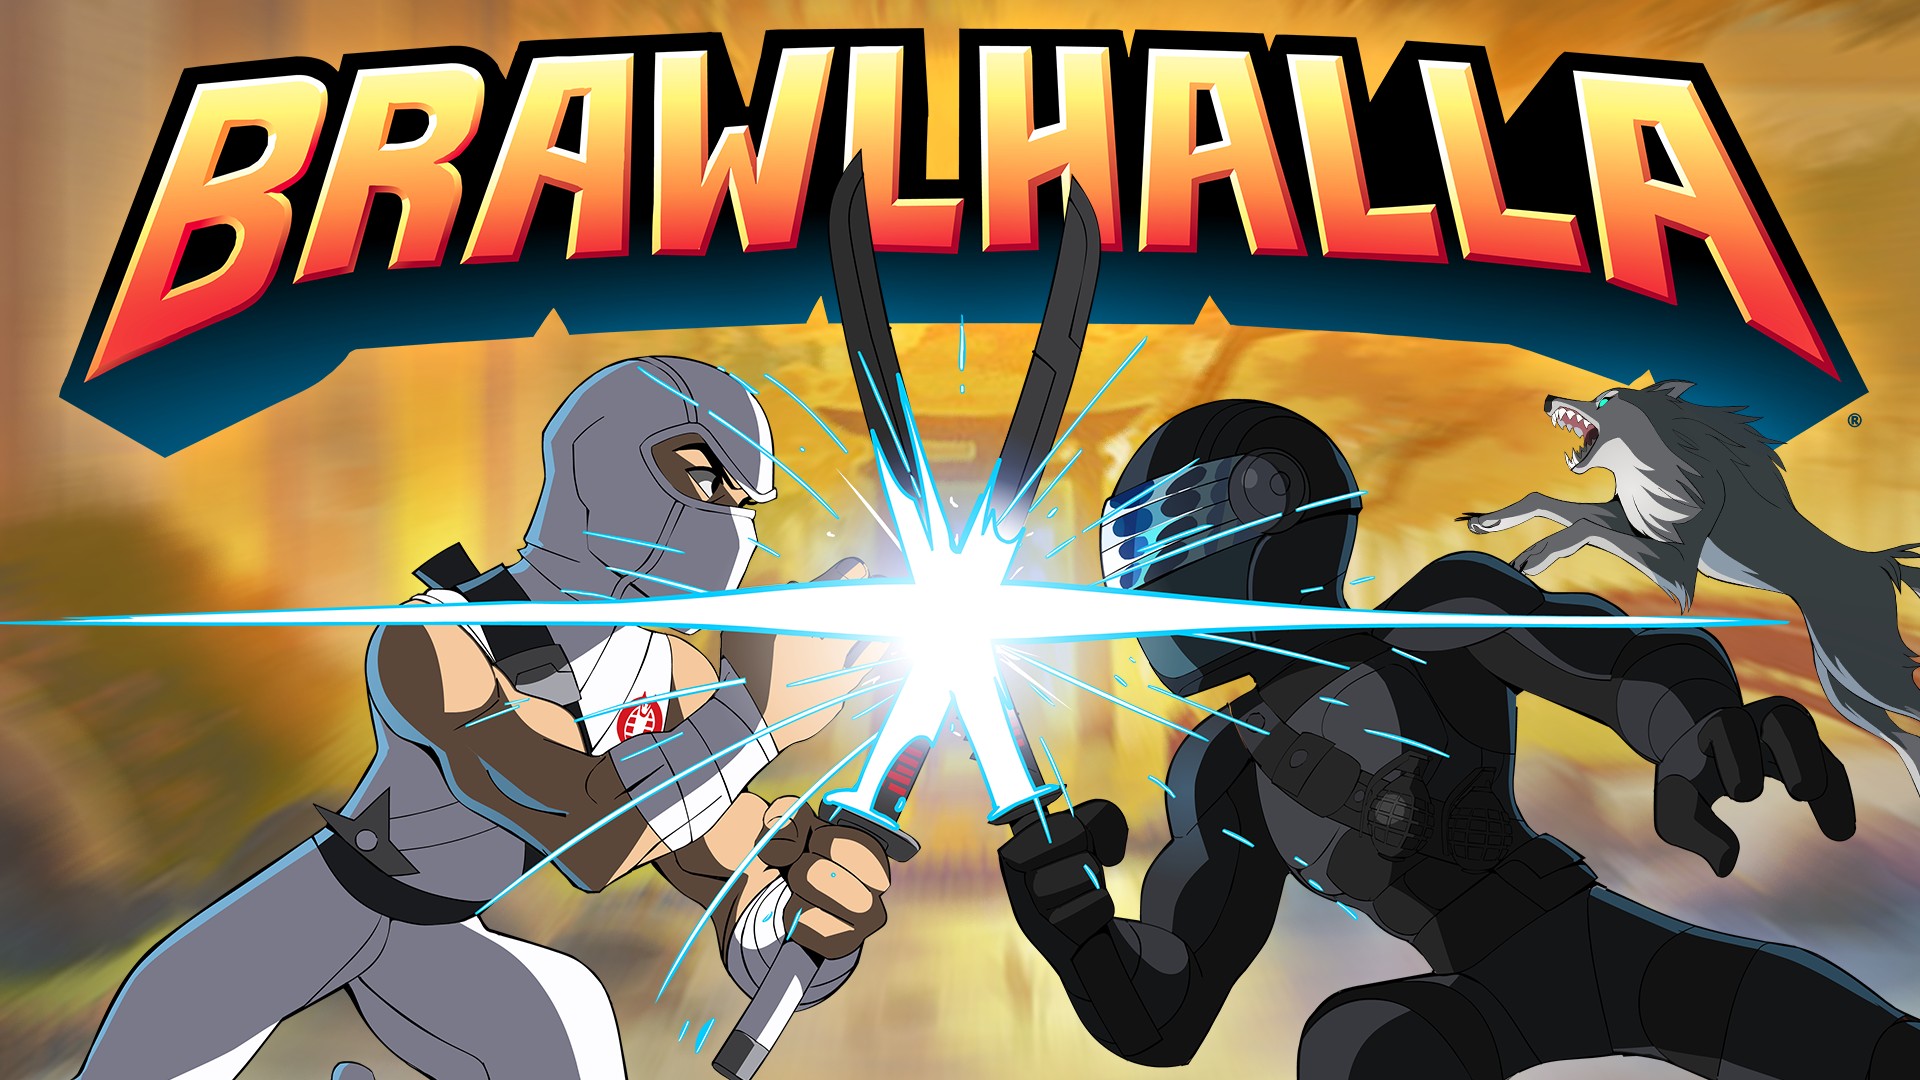 Fight As Snake Eyes & Storm Shadow From G.I. JOE In BRAWLHALLA Today